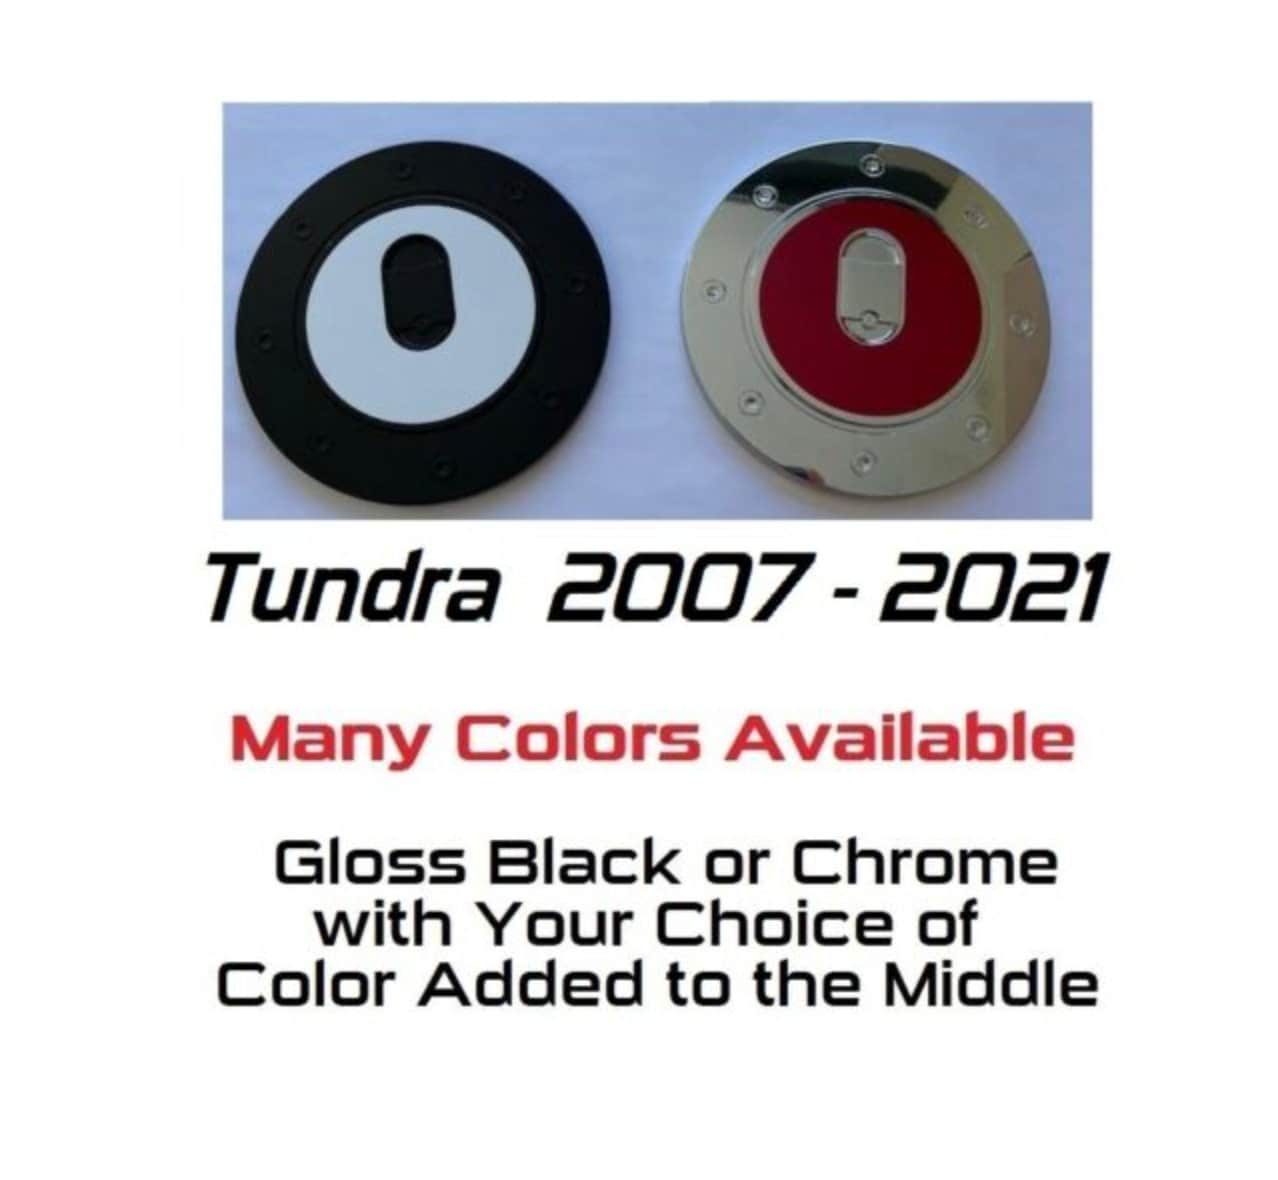 Custom Black OR Chrome Gas Door Overlays / Covers For 2007 - 2021 Toyota Tundra -- You Choose the Color of the Middle Insert